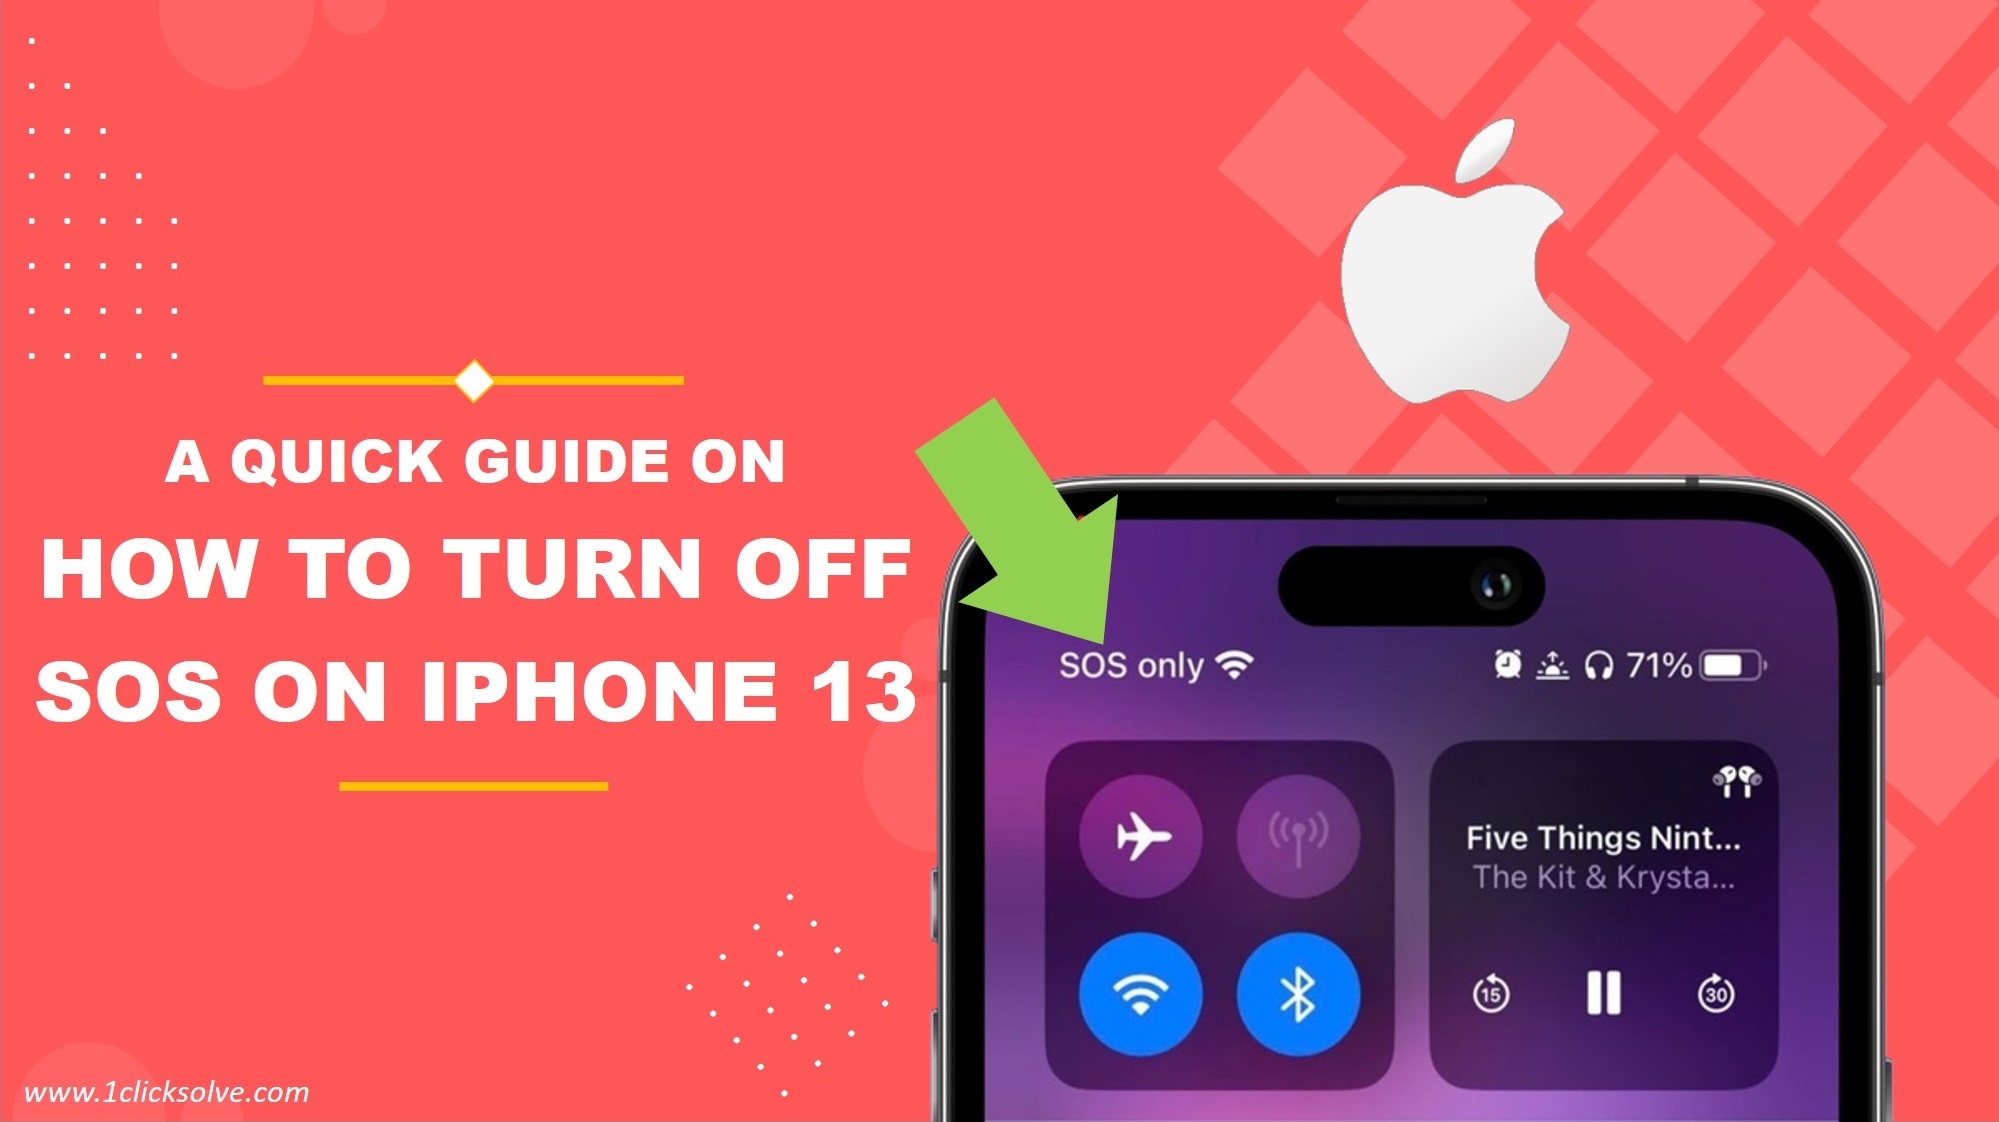 A Quick Guide on How to Turn Off SOS on iPhone 13